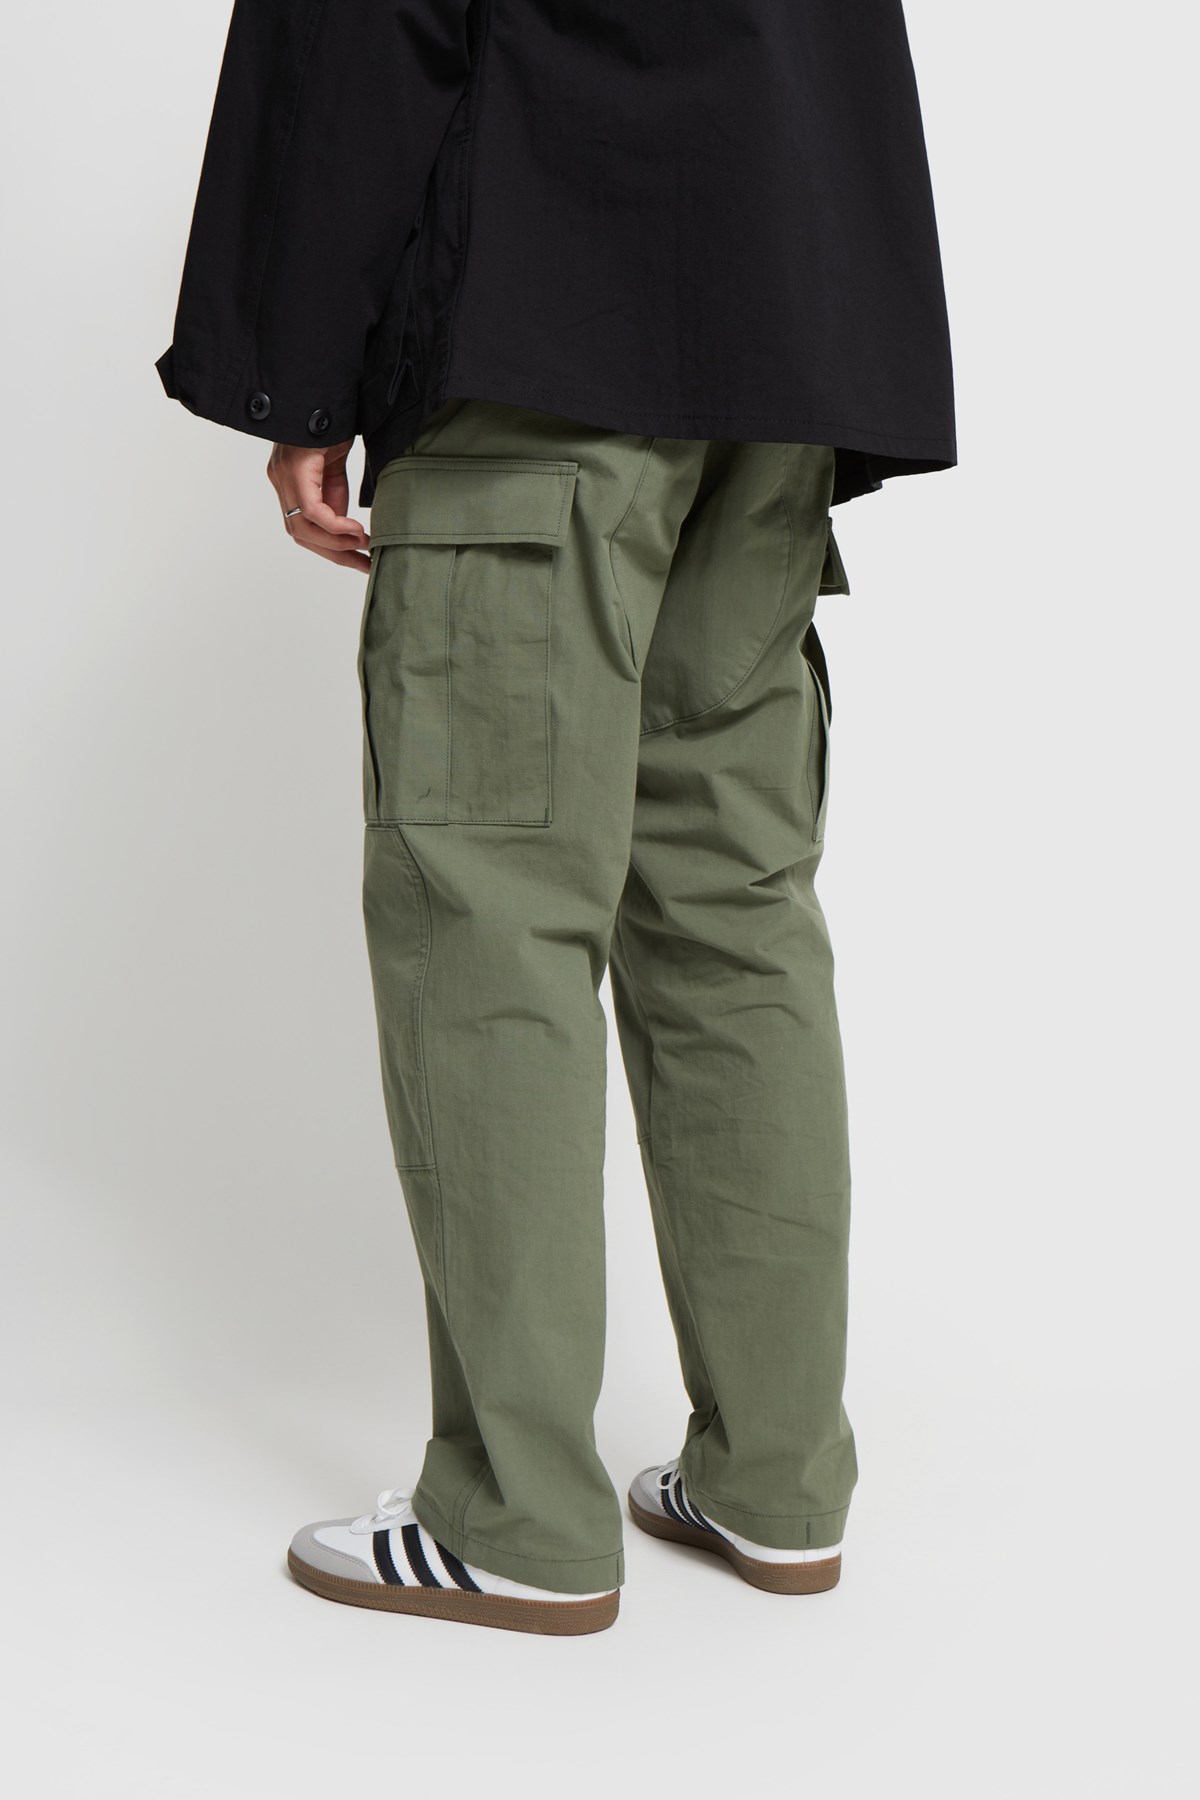 WTAPS WMILL-Trousers 01 / NYCO. Olive drab | WoodWood.com